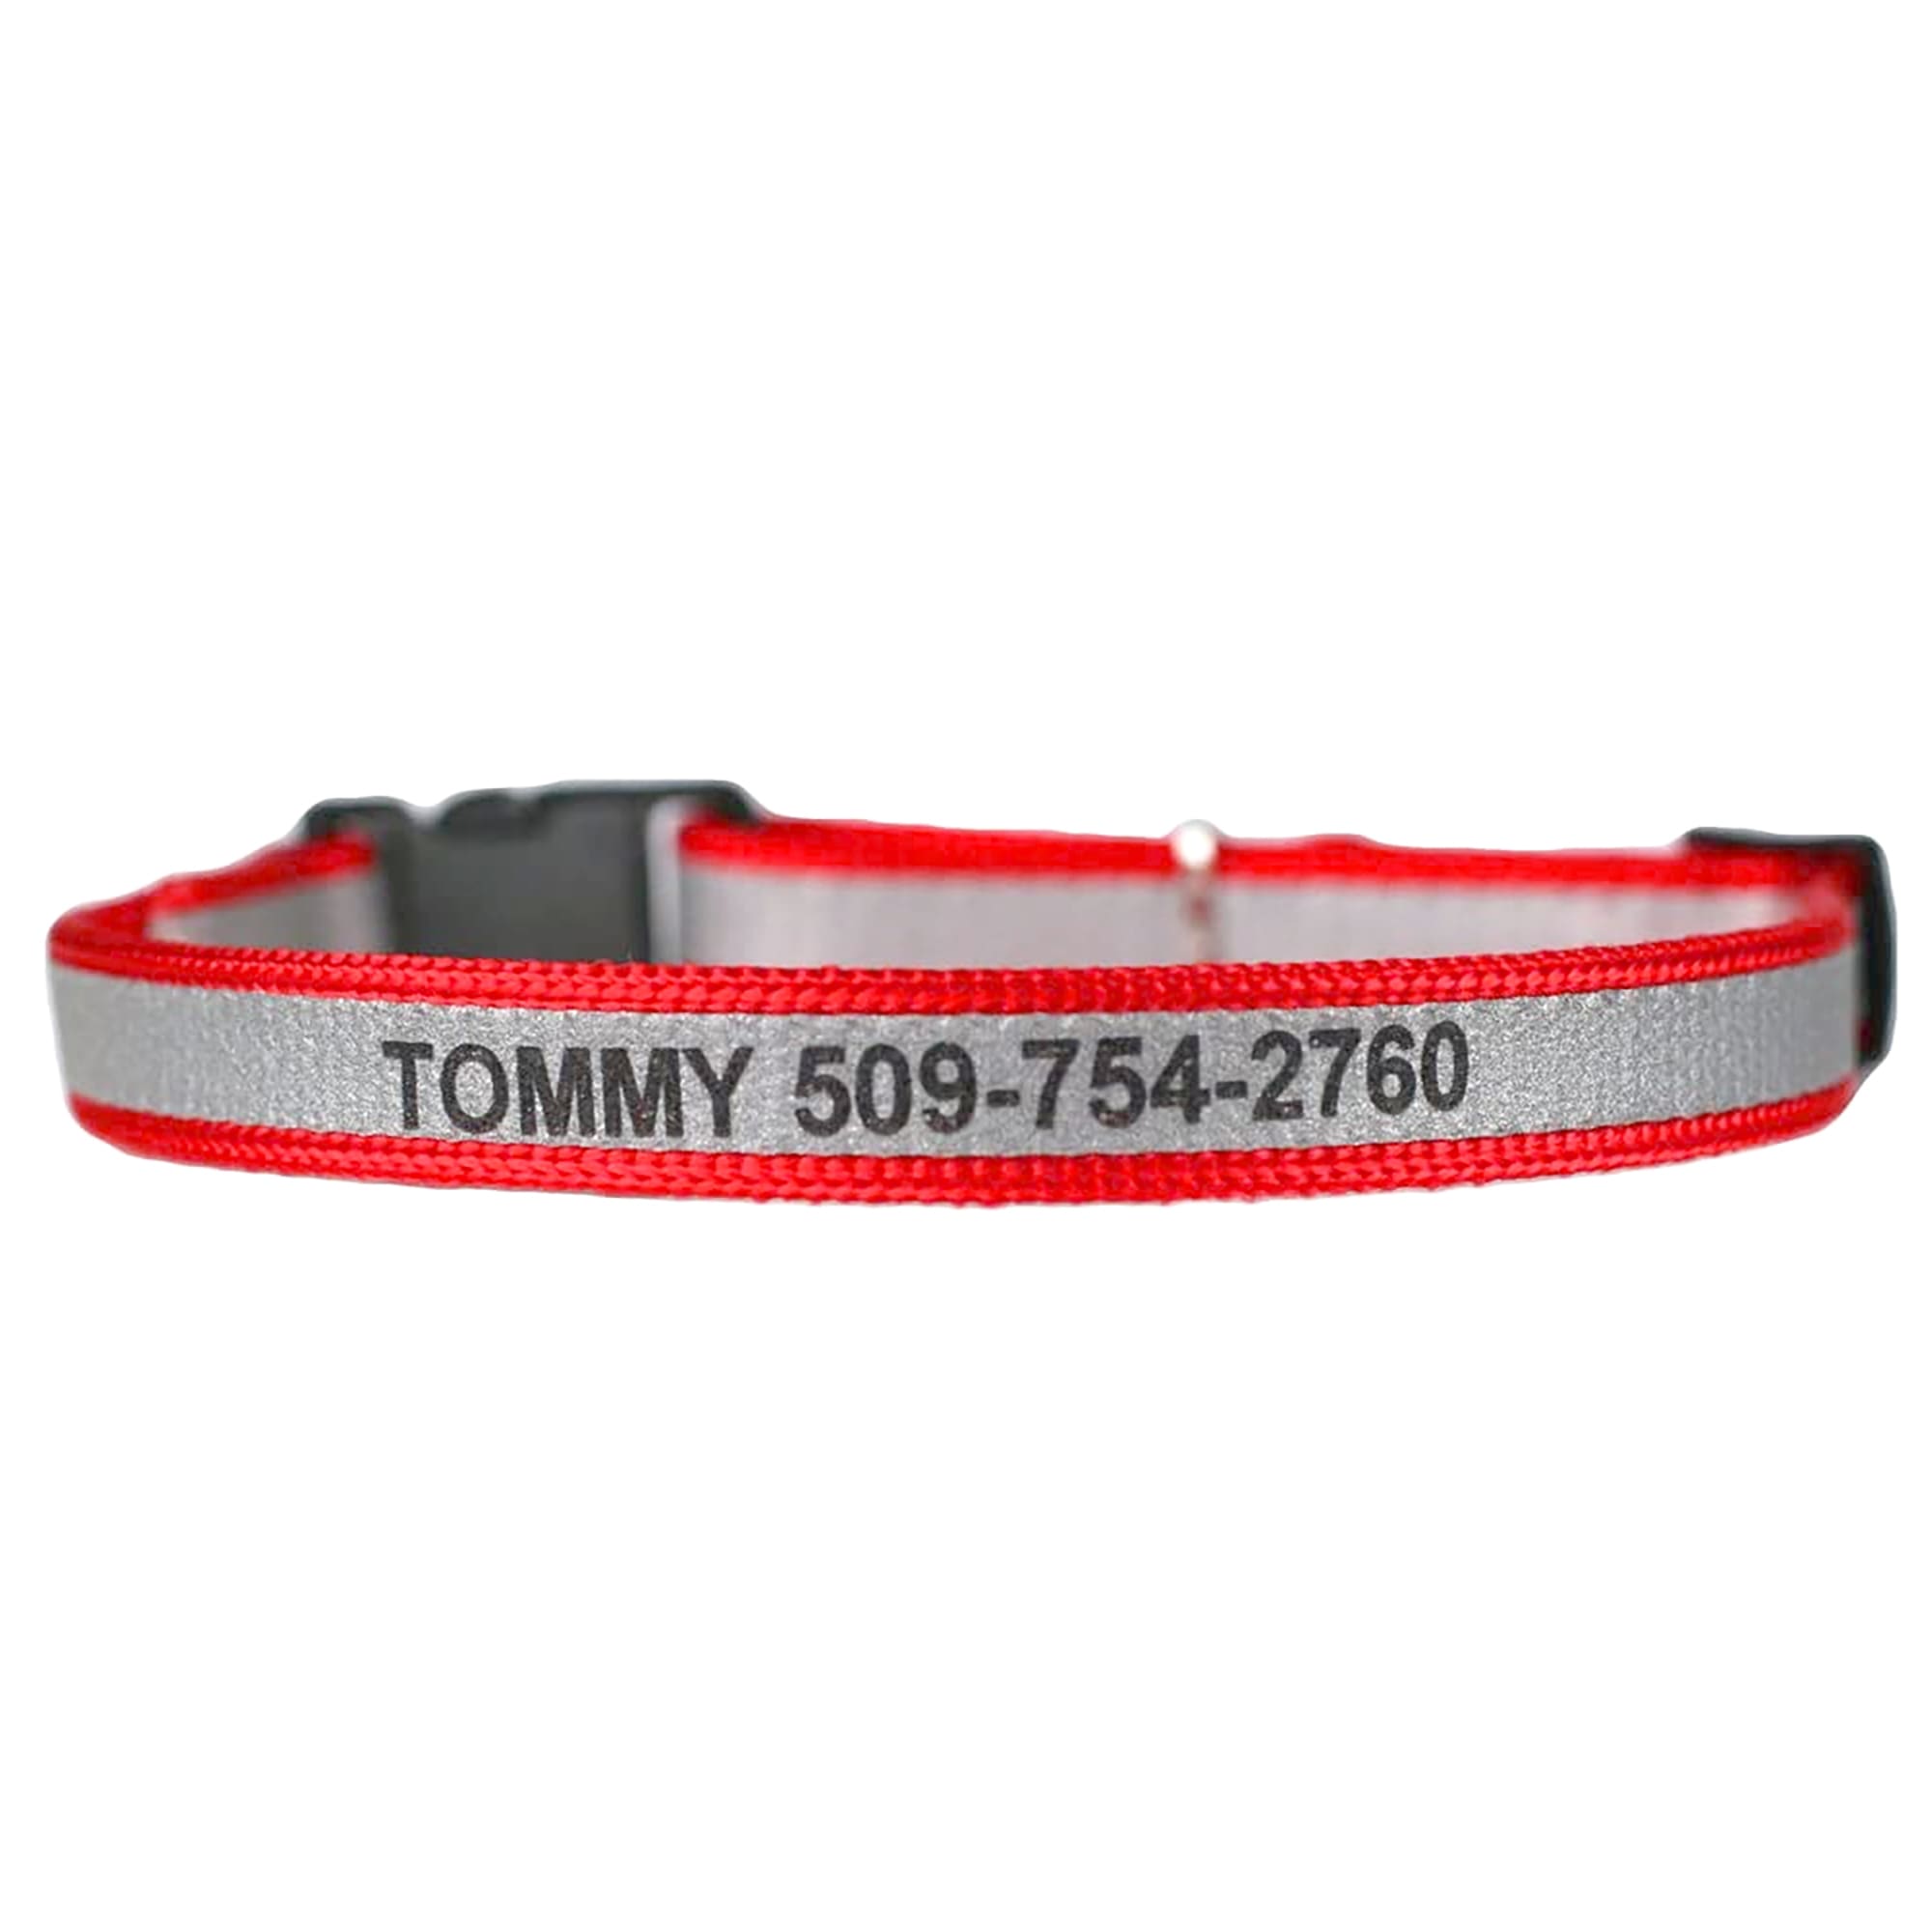 Personalized Nylon Breakaway Cat Collars Safety Reflective Quick Release Buckle 